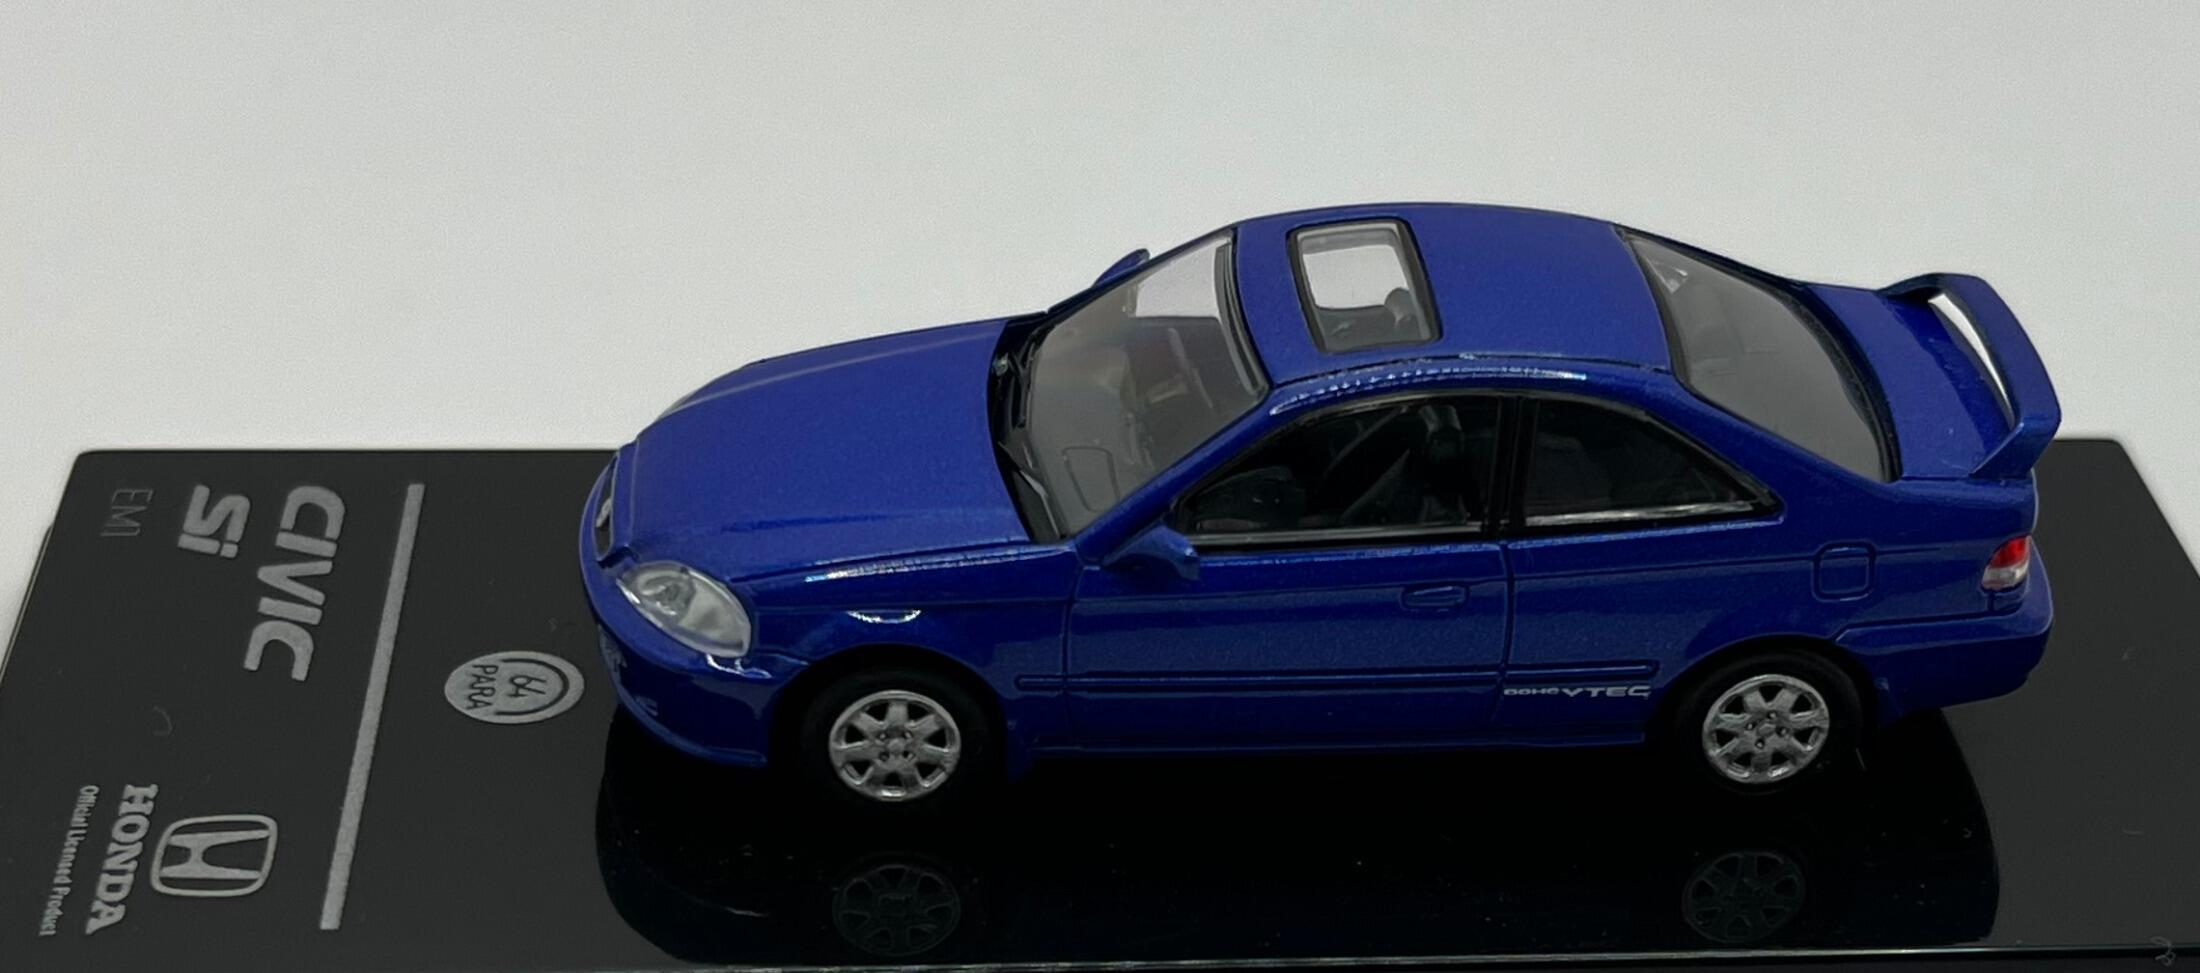 An excellent scale model of a 1999 Honda Civic Si decorated in electron blue pearl with high rear spoiler, sunroof and silver wheels.